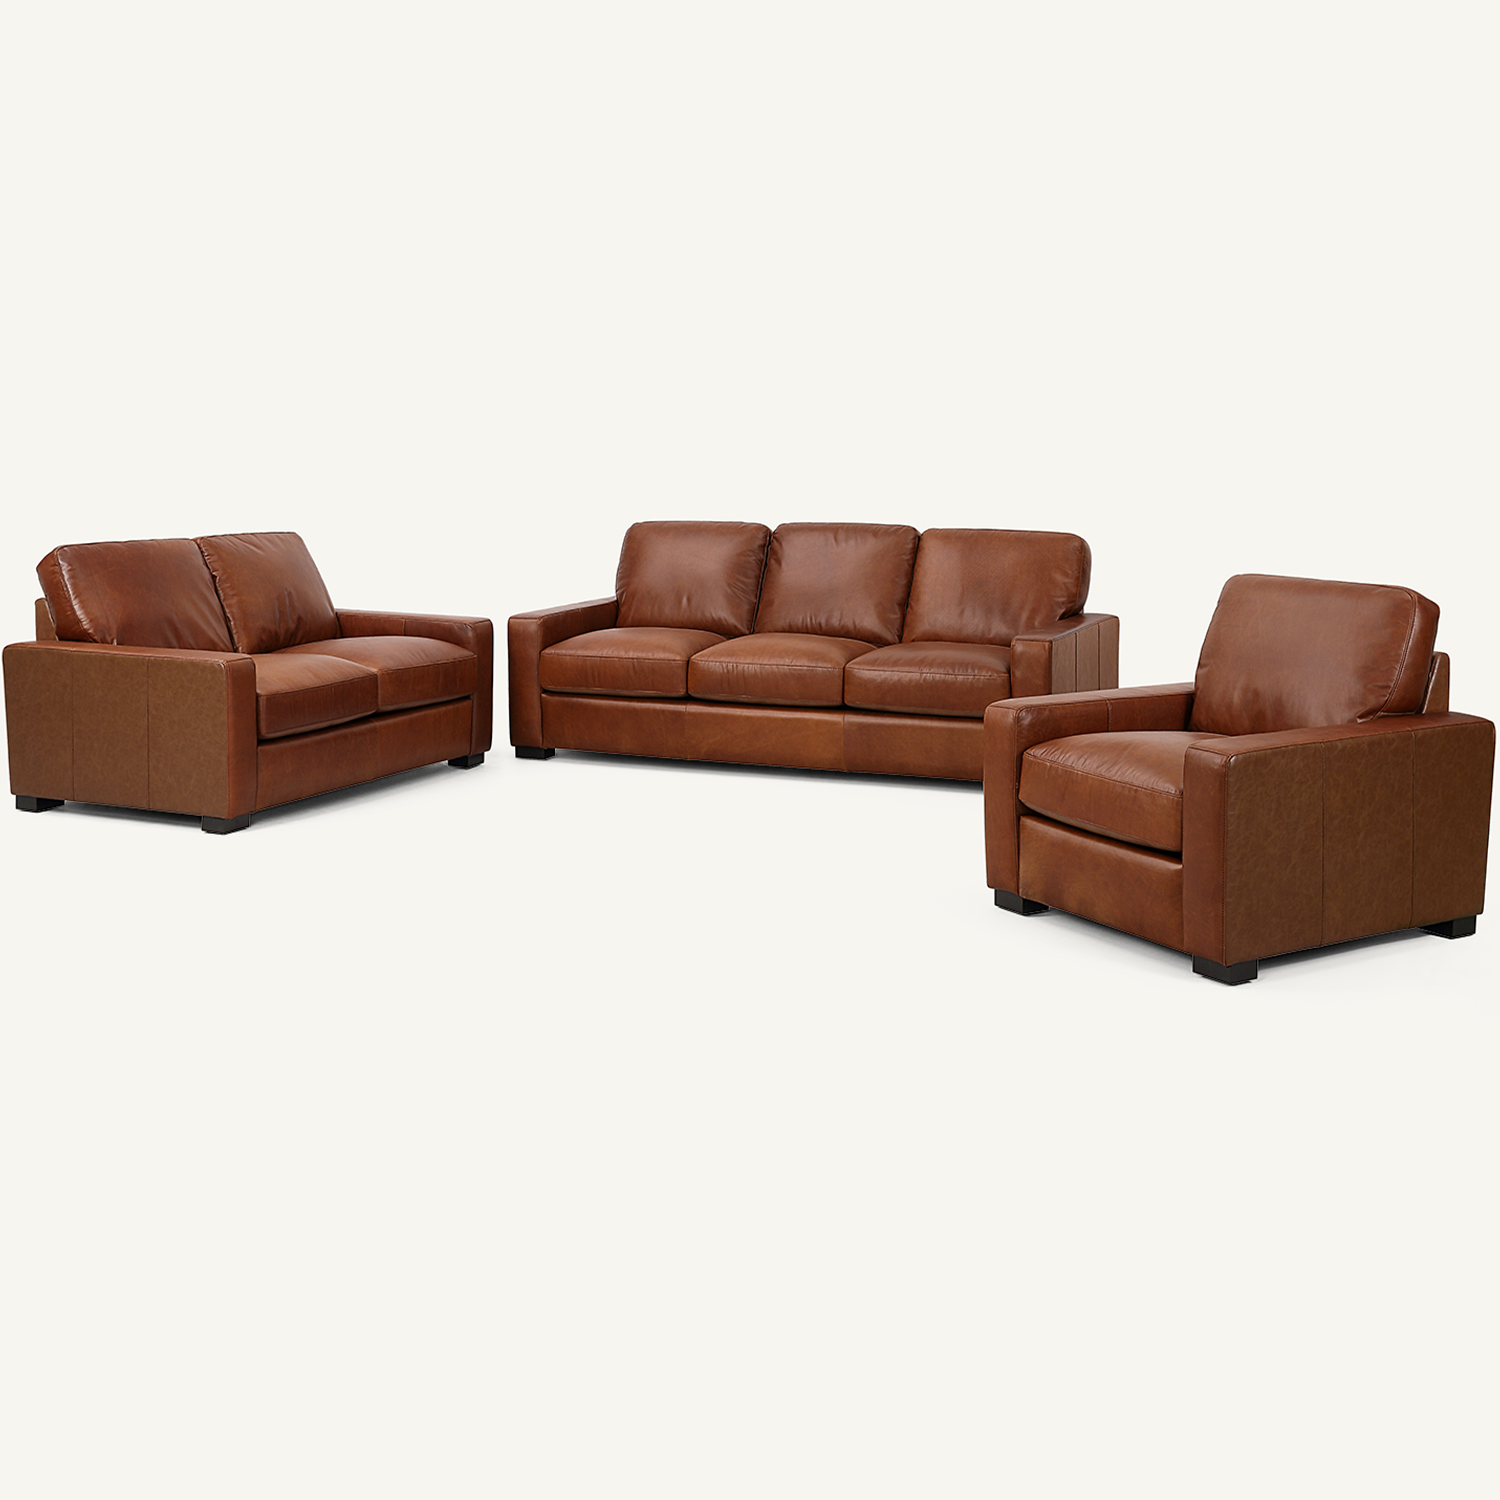 Randall Chestnut Brown Oil Wax Leather 3 Pieces Living Room Sofa Set